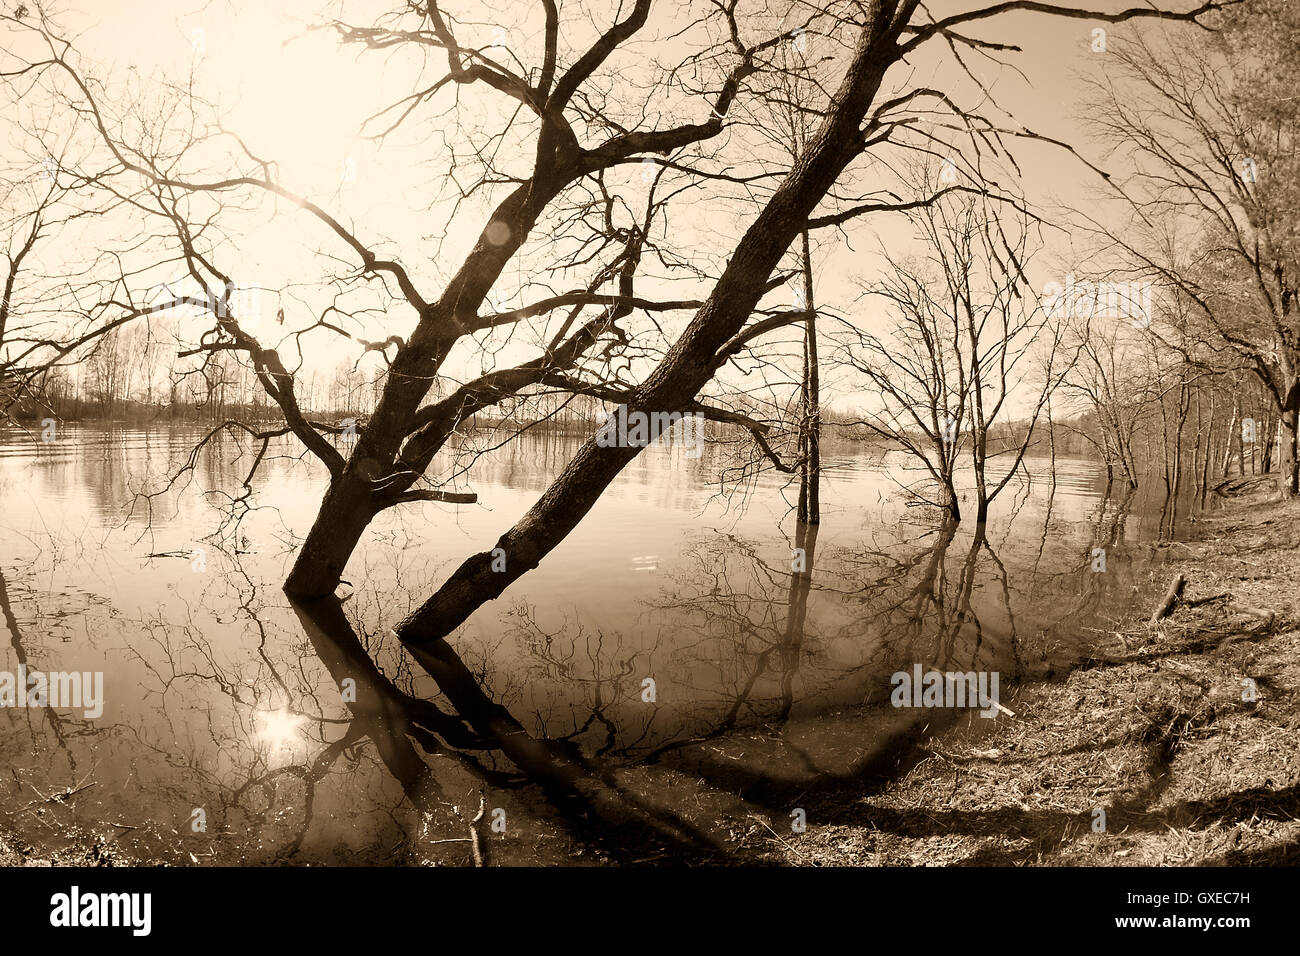 Landscape in sepia with sky, sun, trees standing in flooded river by a Sprig time near Vladimir (Russia). Shot with fish-eye len Stock Photo